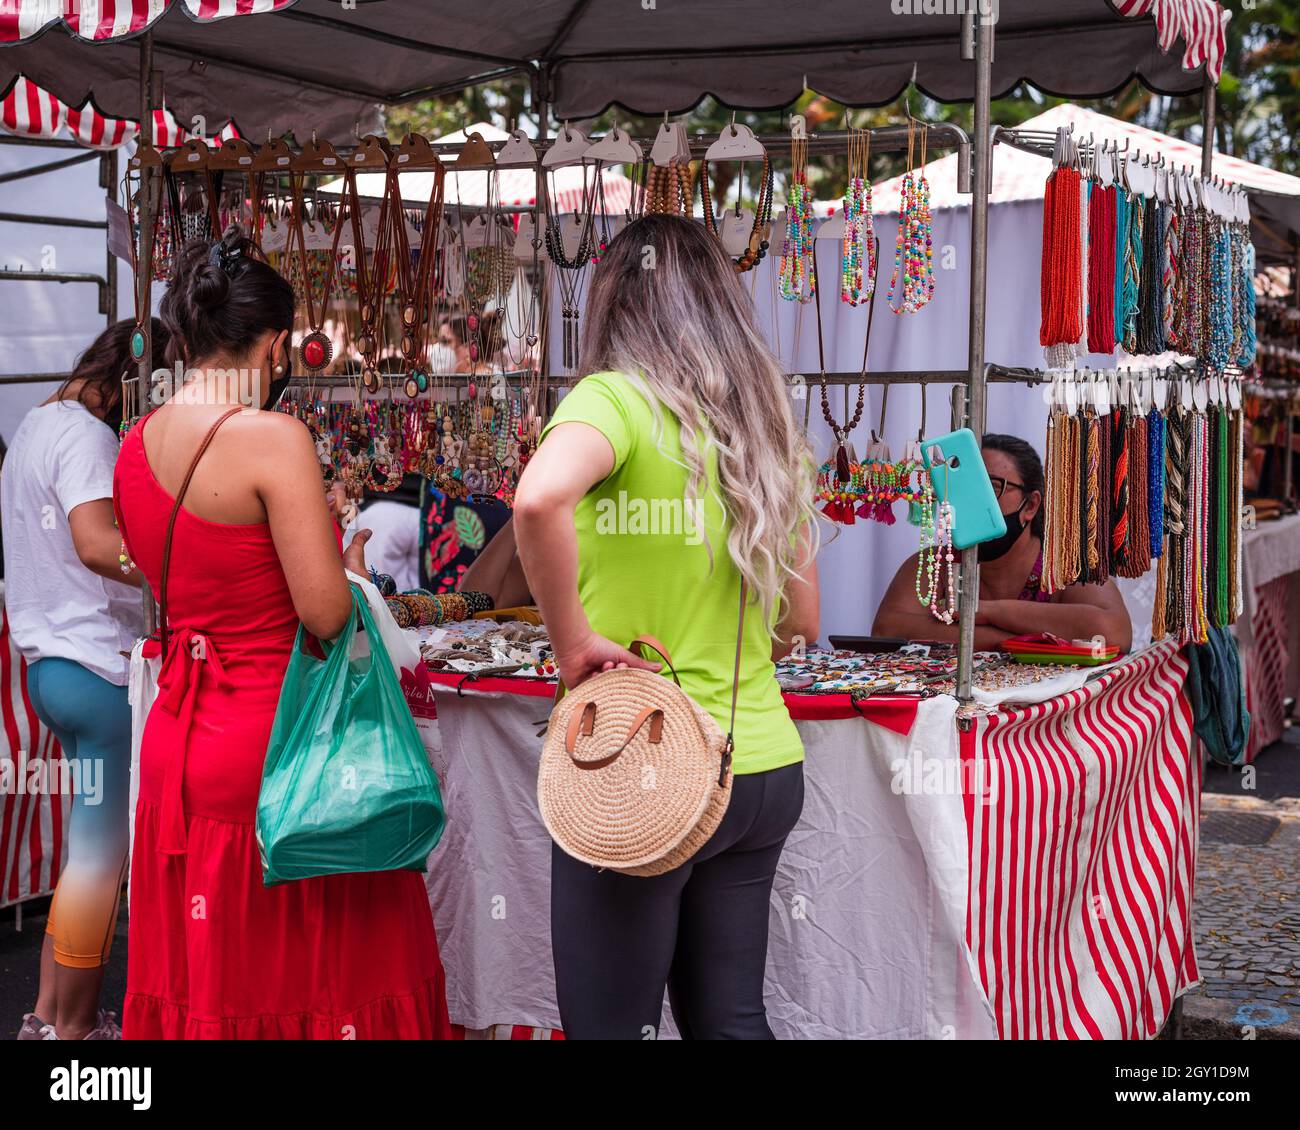 Women shopping for costume jewelry at the Belo Horizonte Hippie